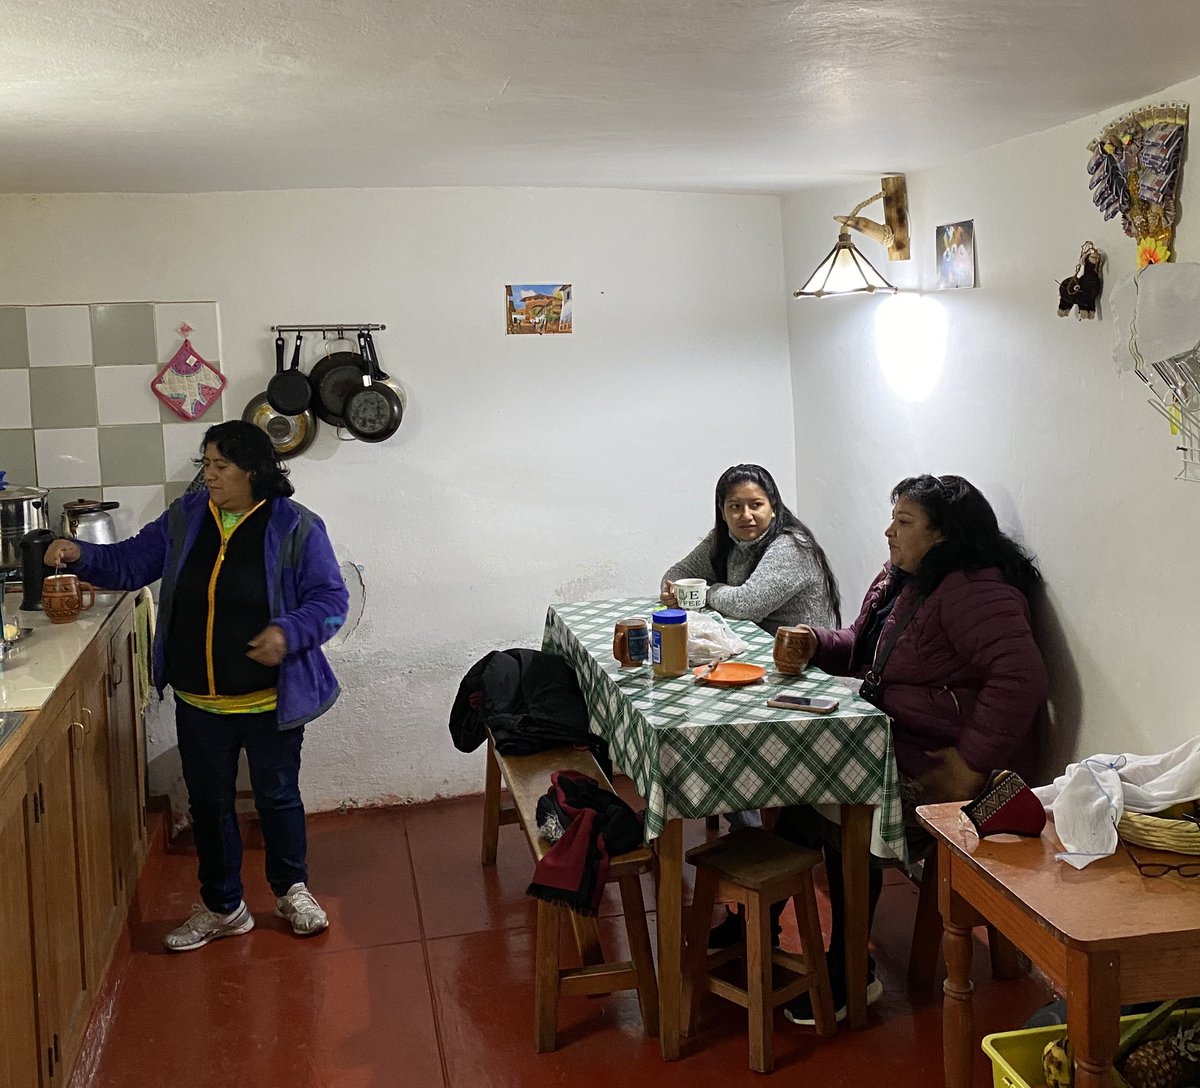 We had time for coffee, which comes from Quillabamba, further down some valleys from us. Martha and Tatiana has made the food we would be eating when we got to the lake where we planned to eat. The pot got wrapped in a textile because that how you keep it warm.